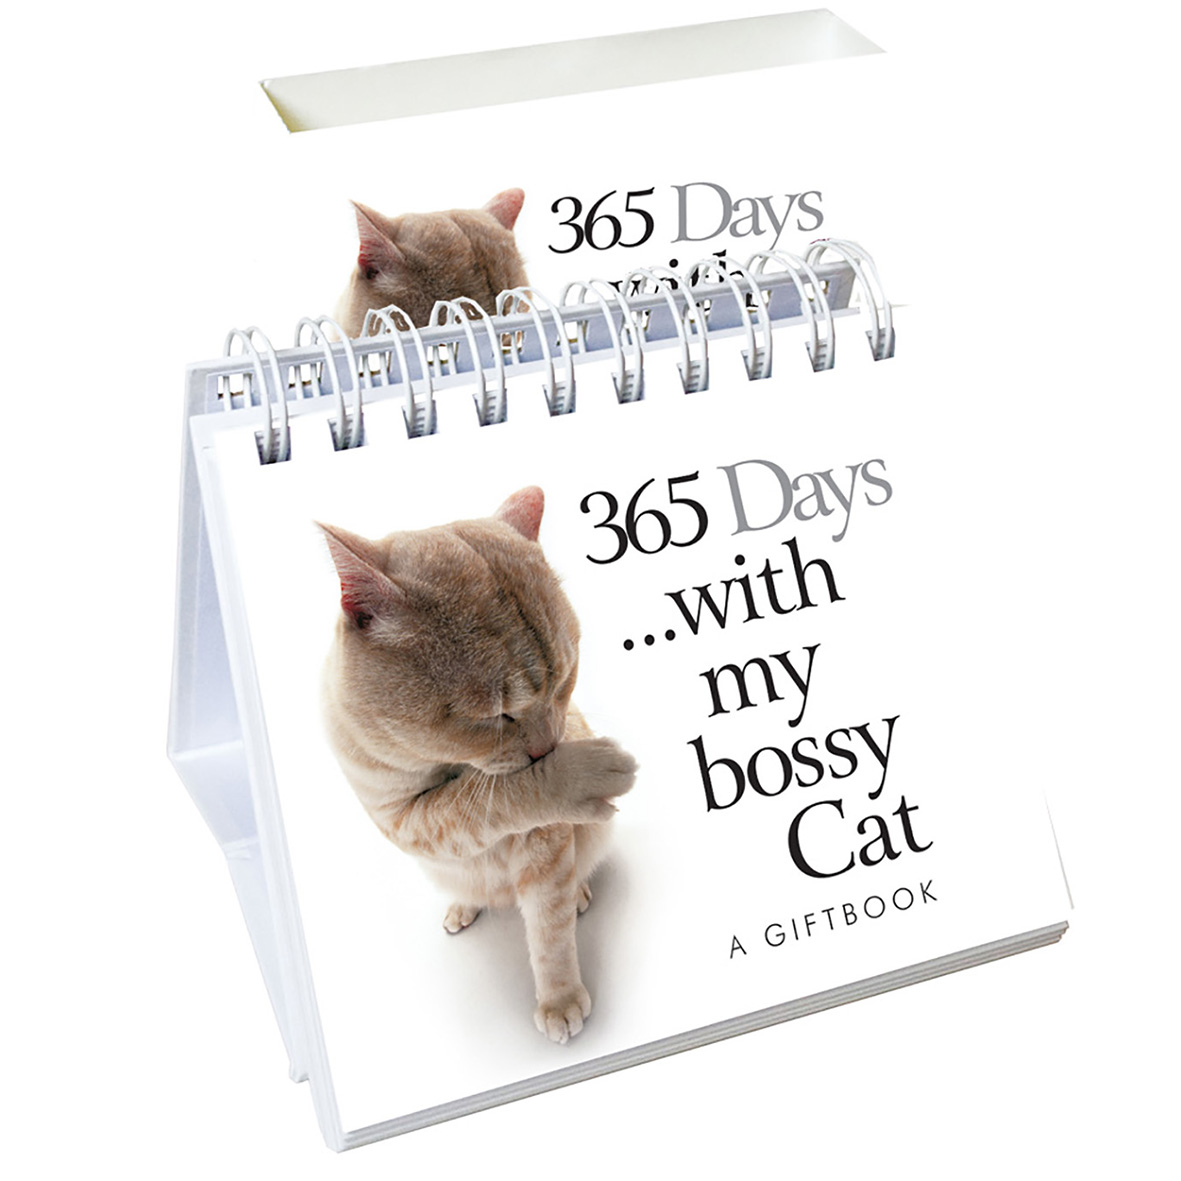 HE 365 Days with my bossy Cat